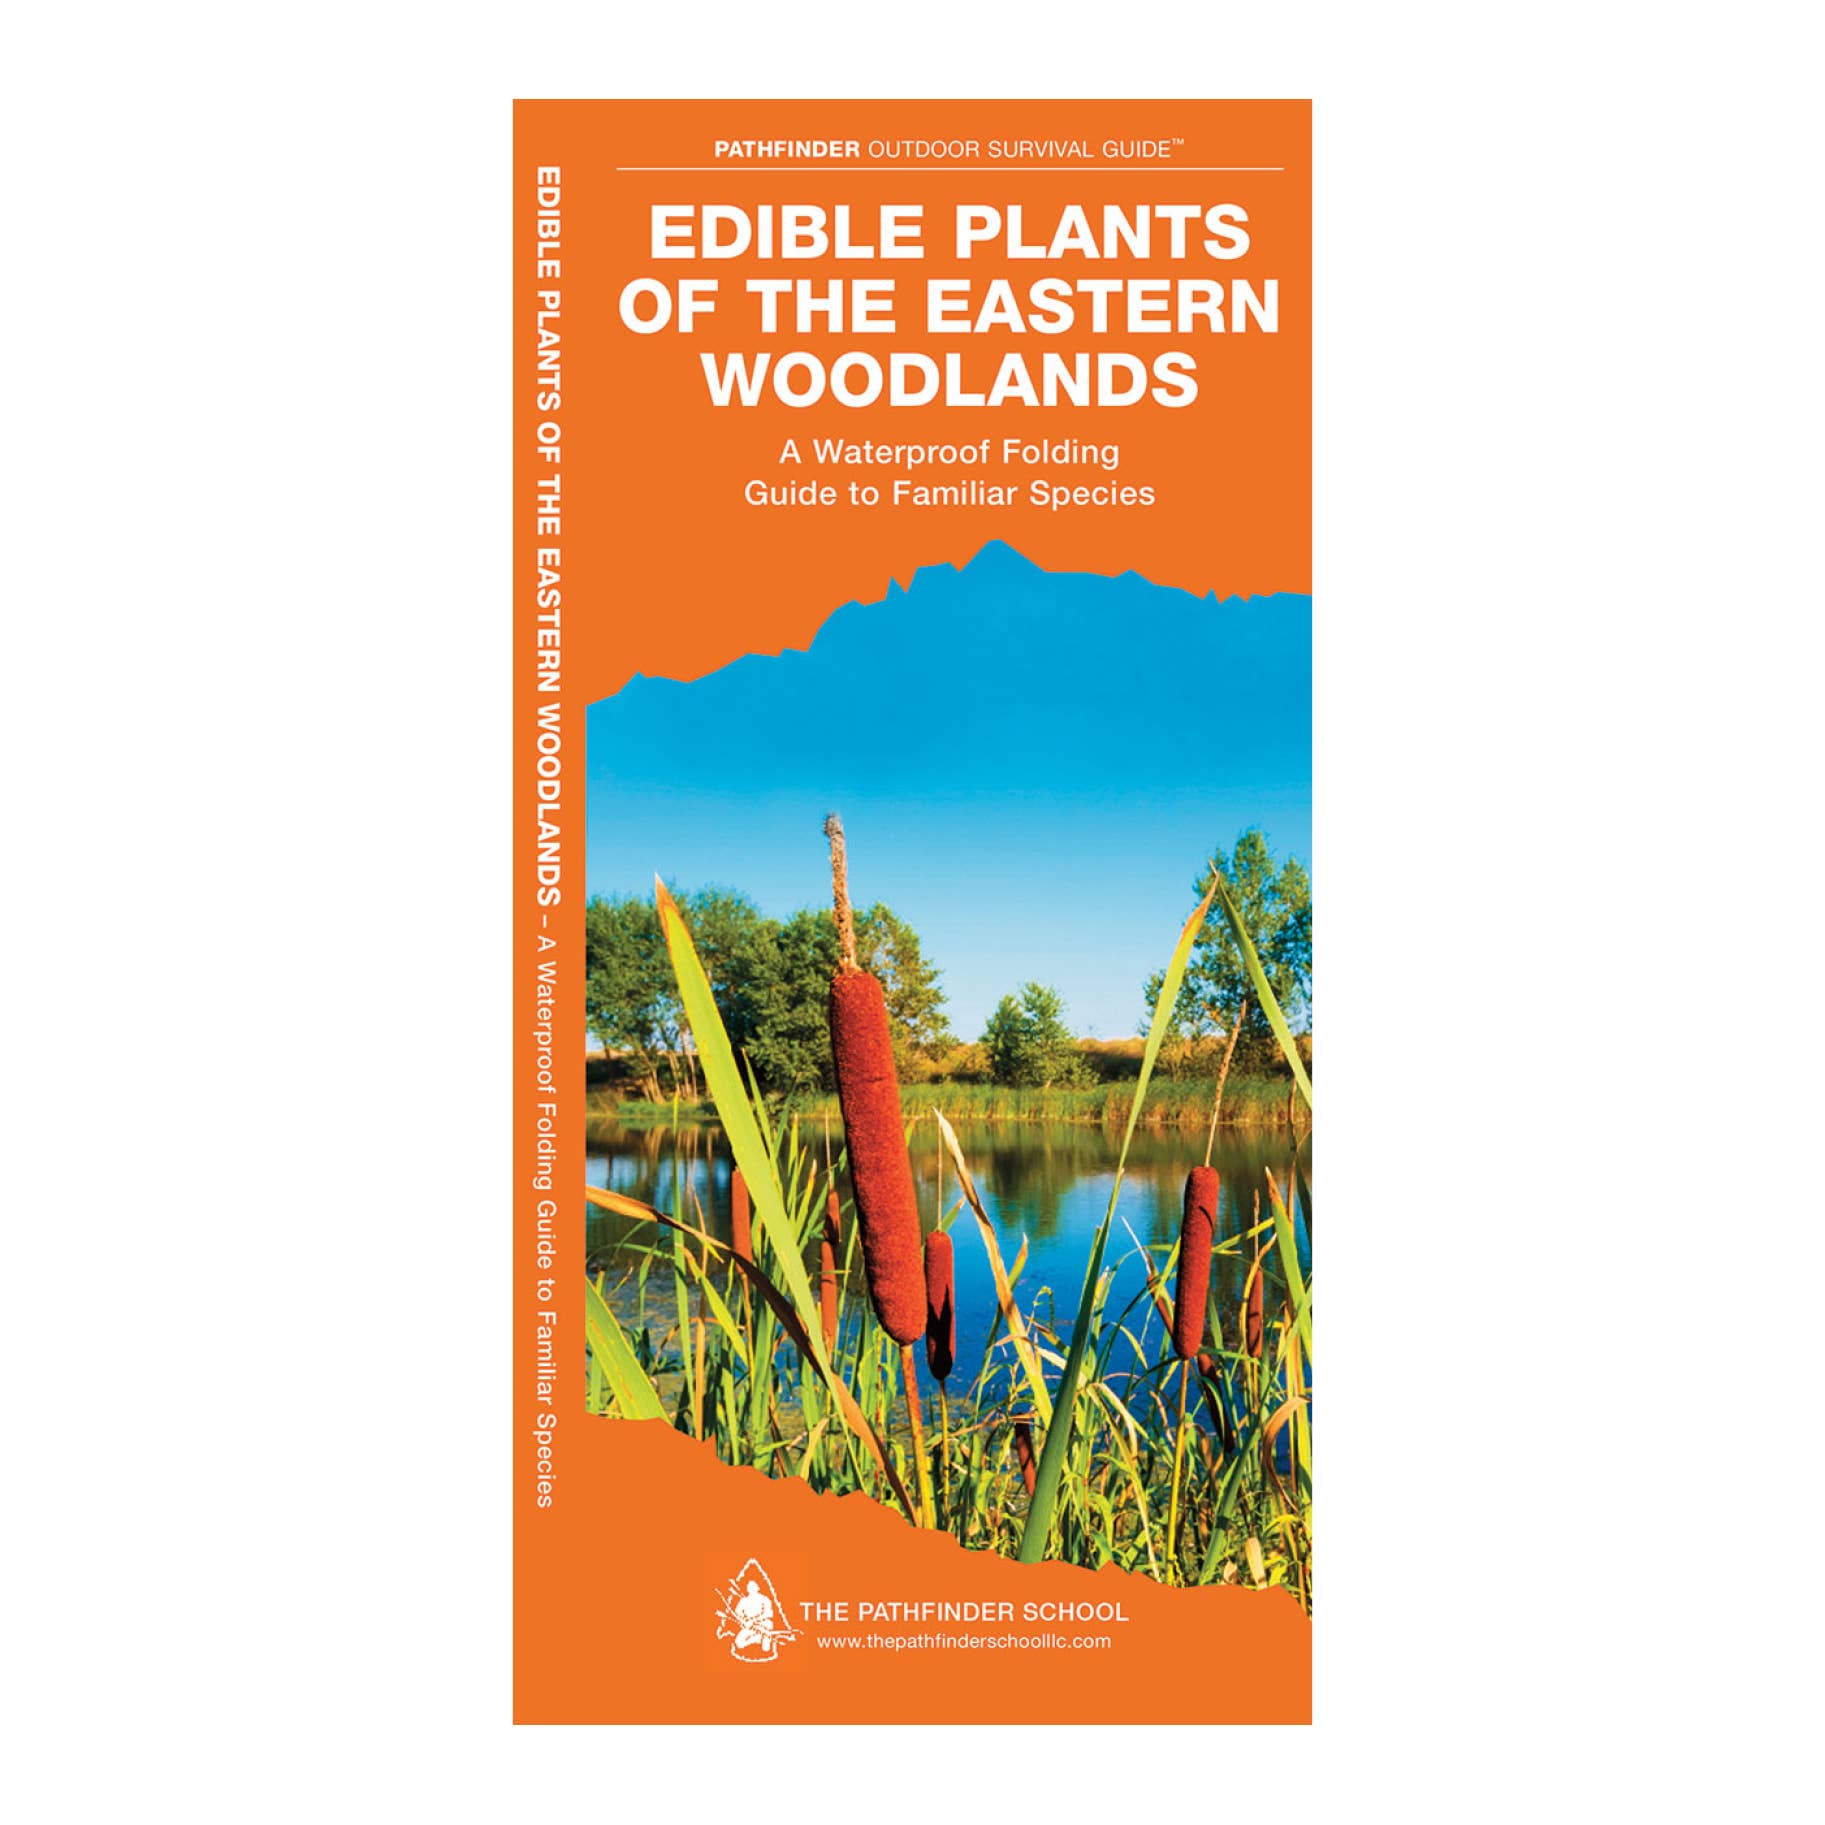 Edible Plants of the Eastern Woodlands A Waterproof Folding Guide to Familiar Species 